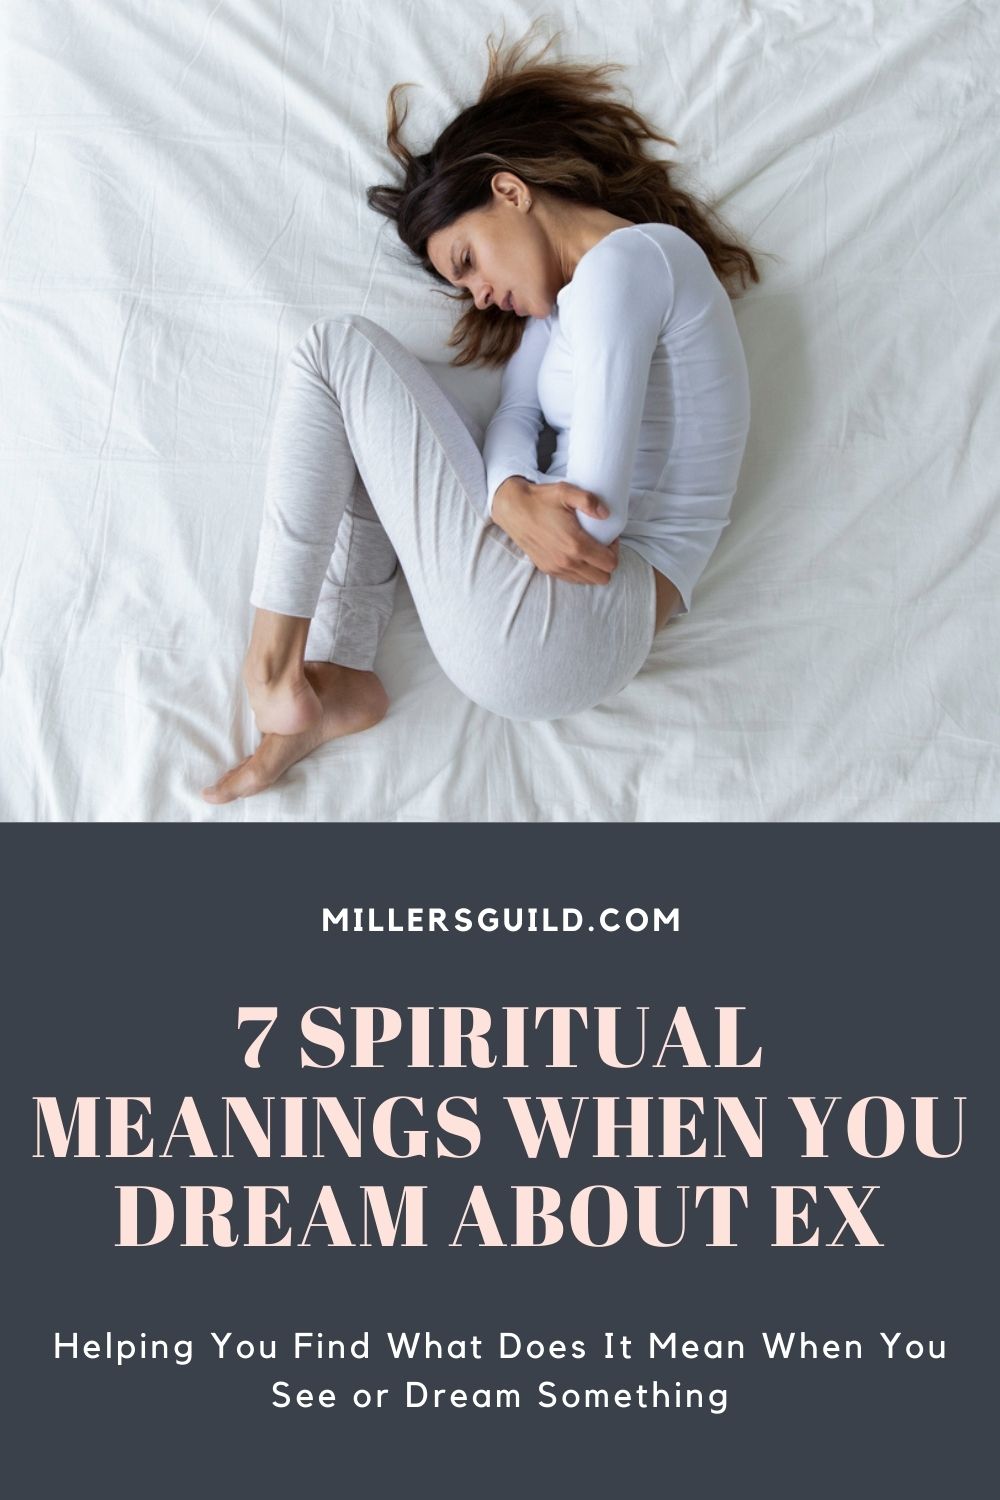 7 Spiritual Meanings When You Dream About Ex 2